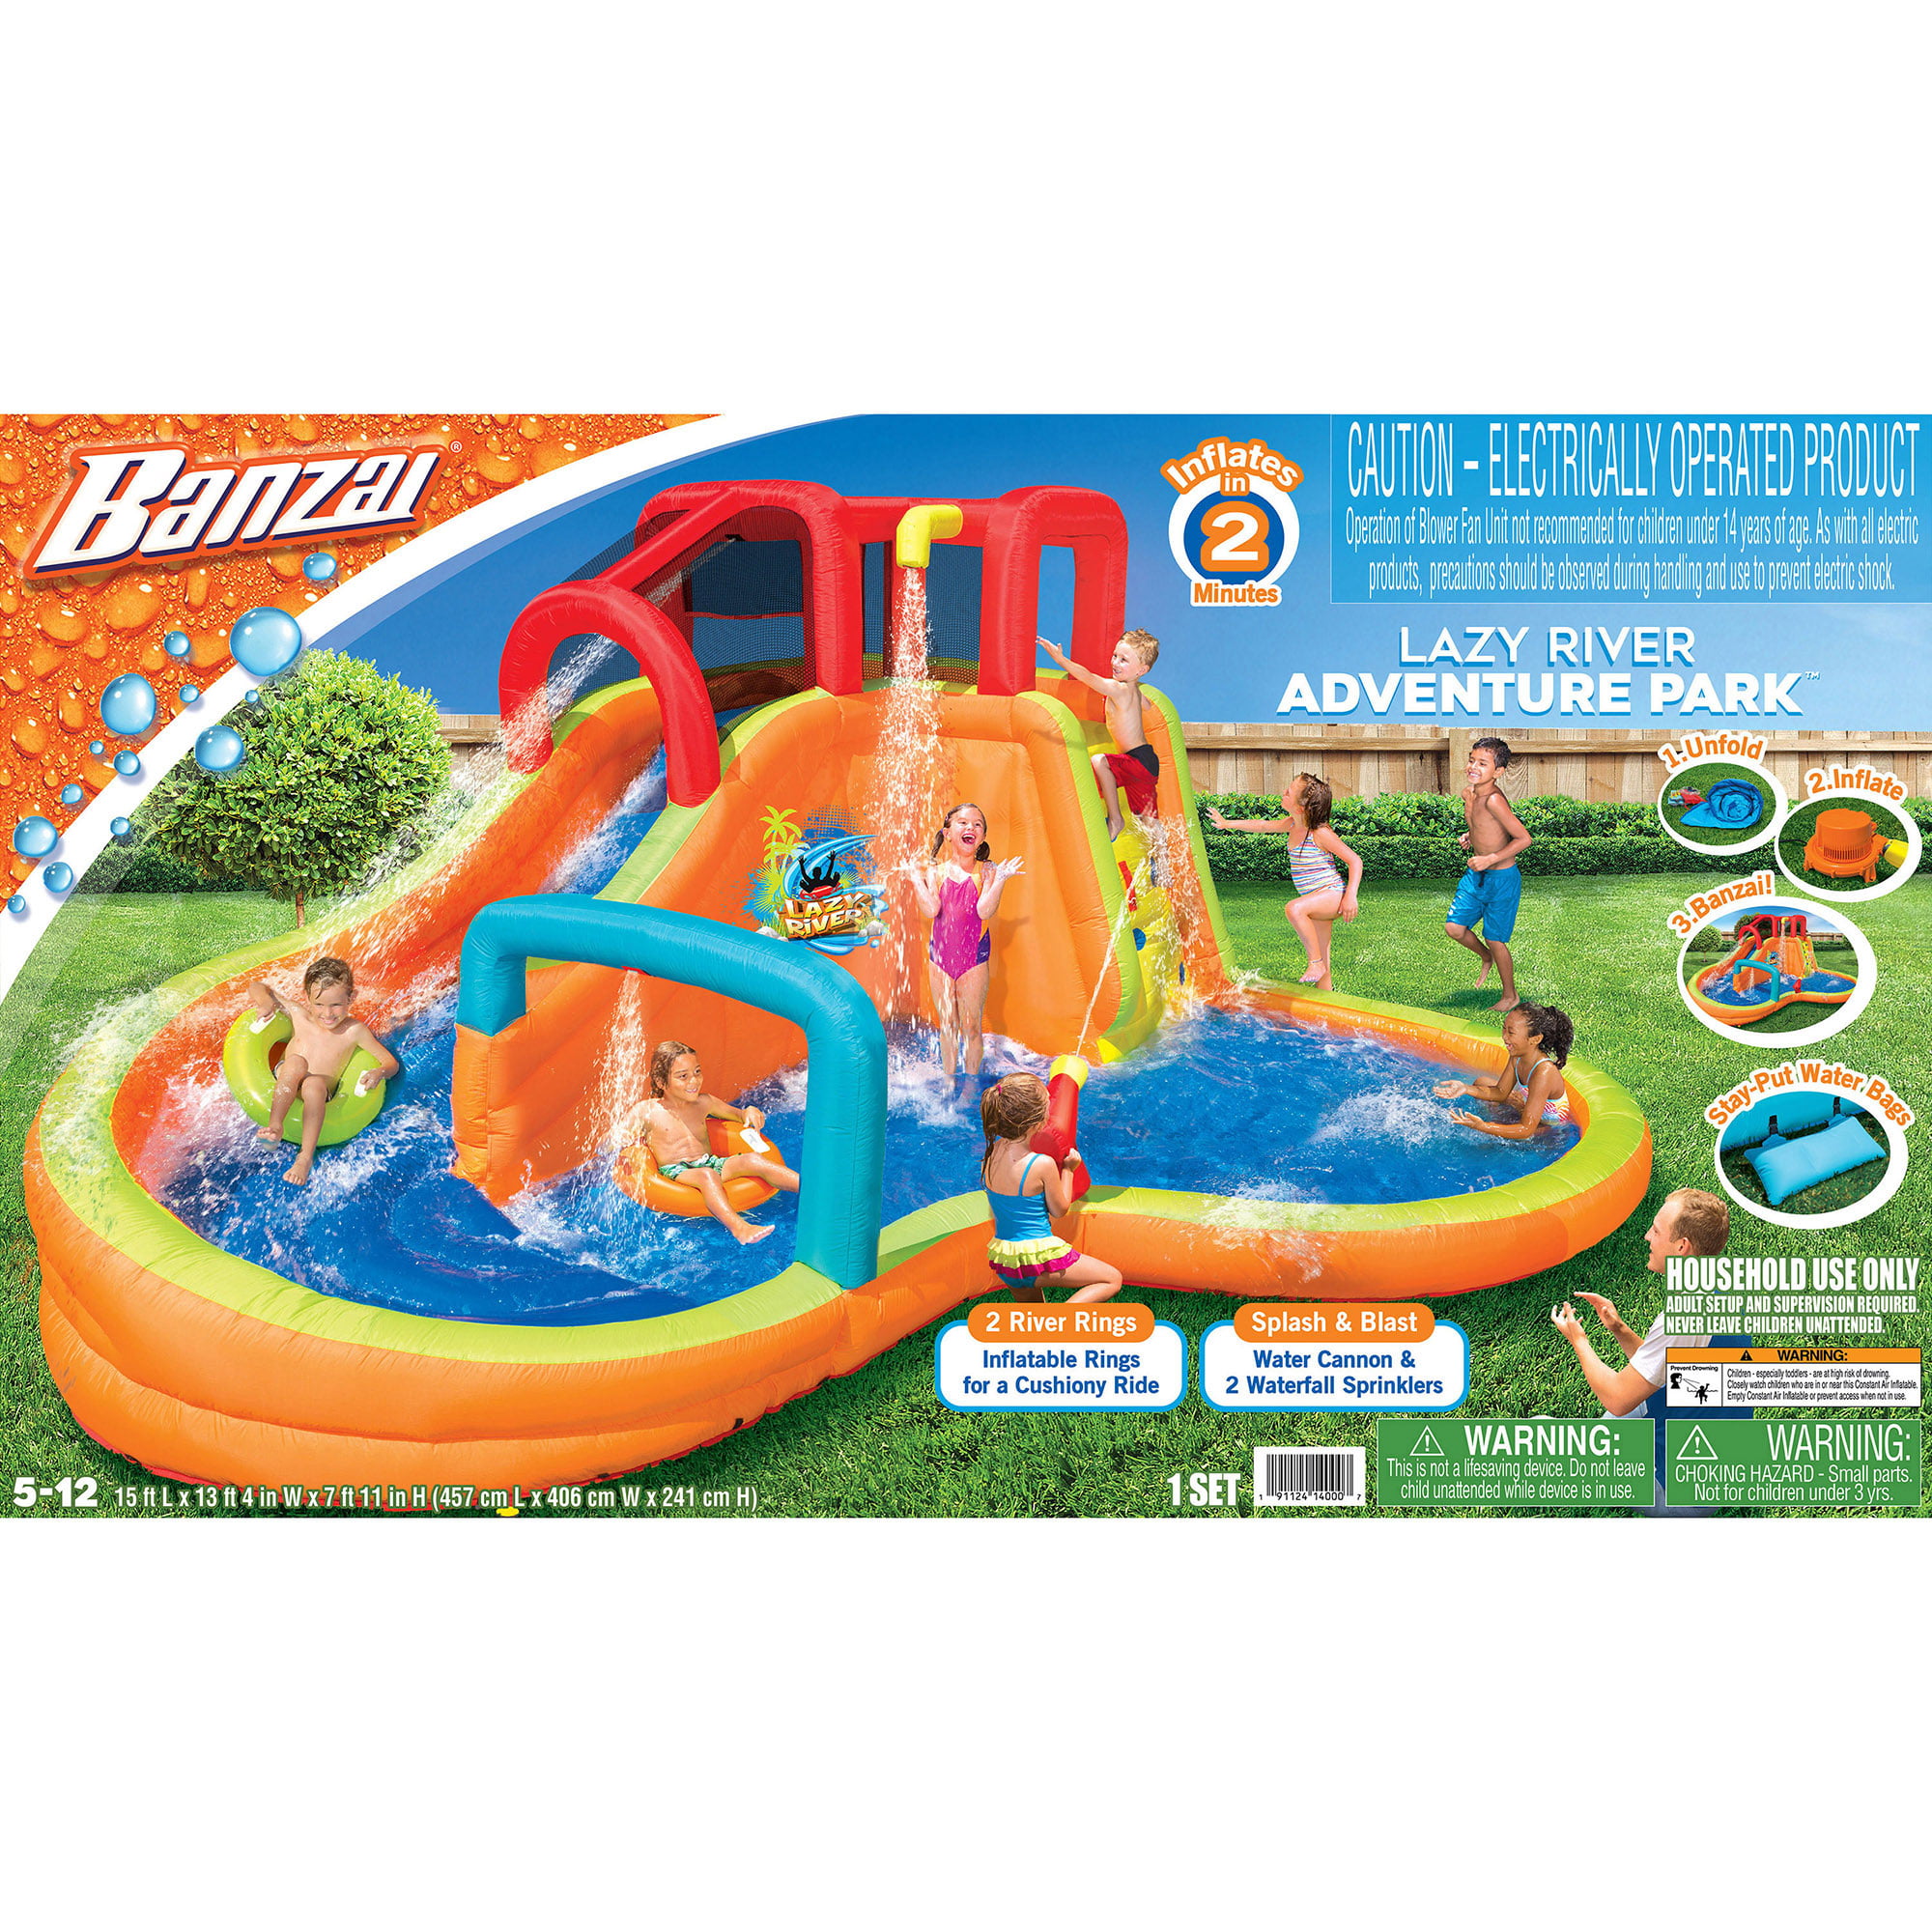 BANZAI Lazy River Inflatable Outdoor Adventure Water Park Slide and Splash Pool 